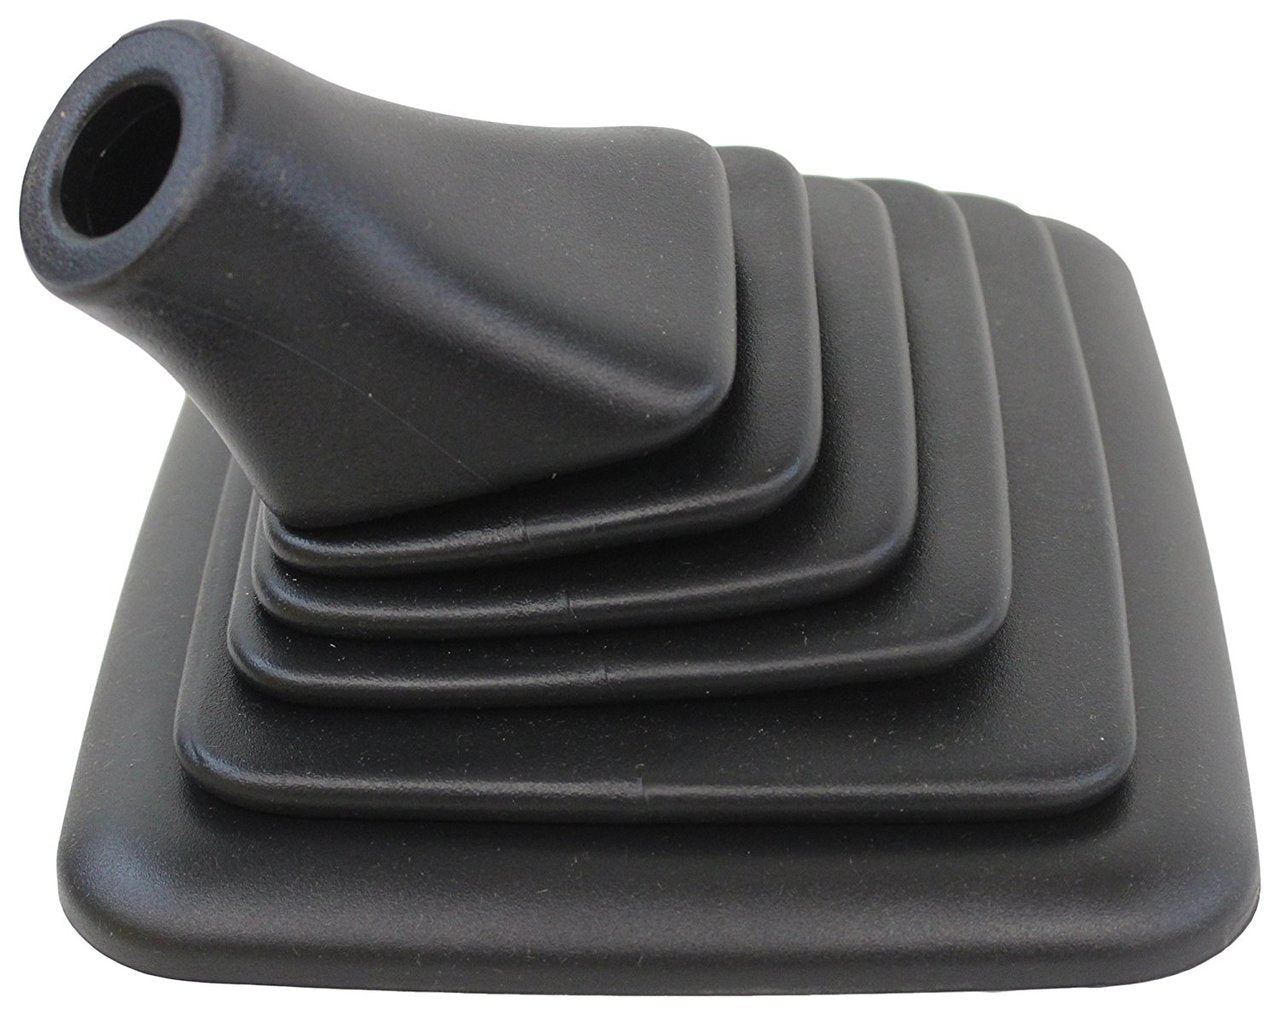 Ford OEM Standard Transmission Shifter Boot, 1994-1997 Ford F-Series